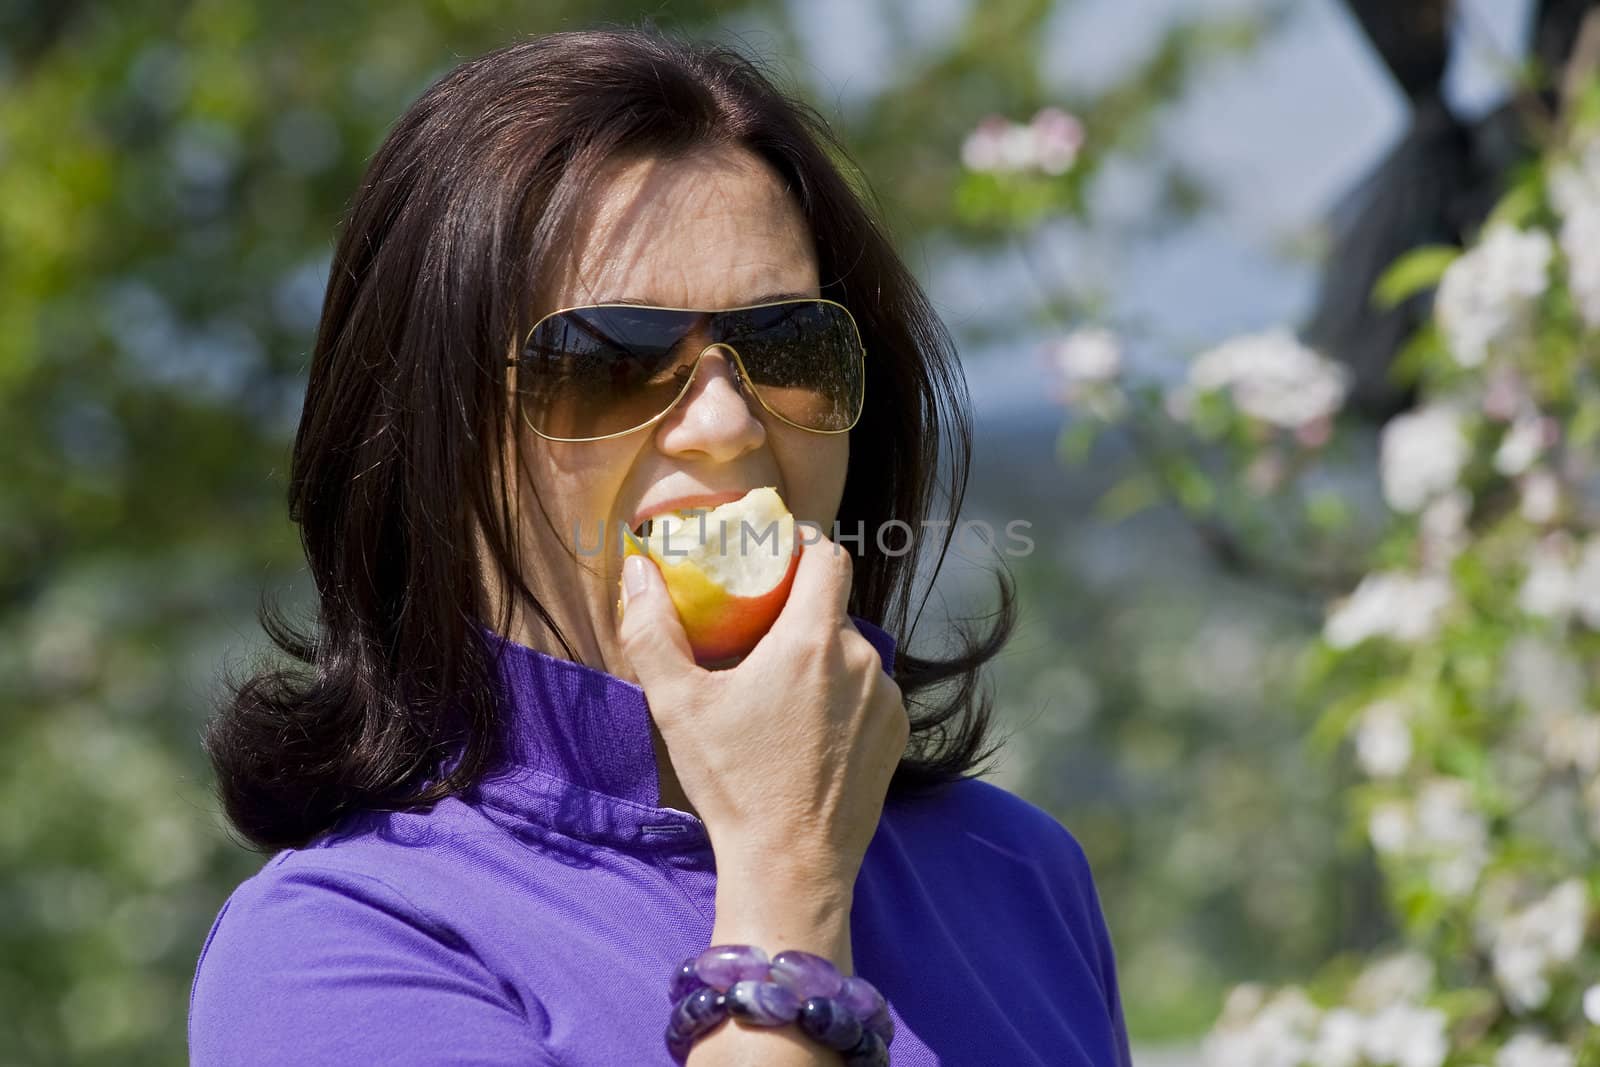 An apple a day - female model eating an apple in an apple-garden by stockbymh